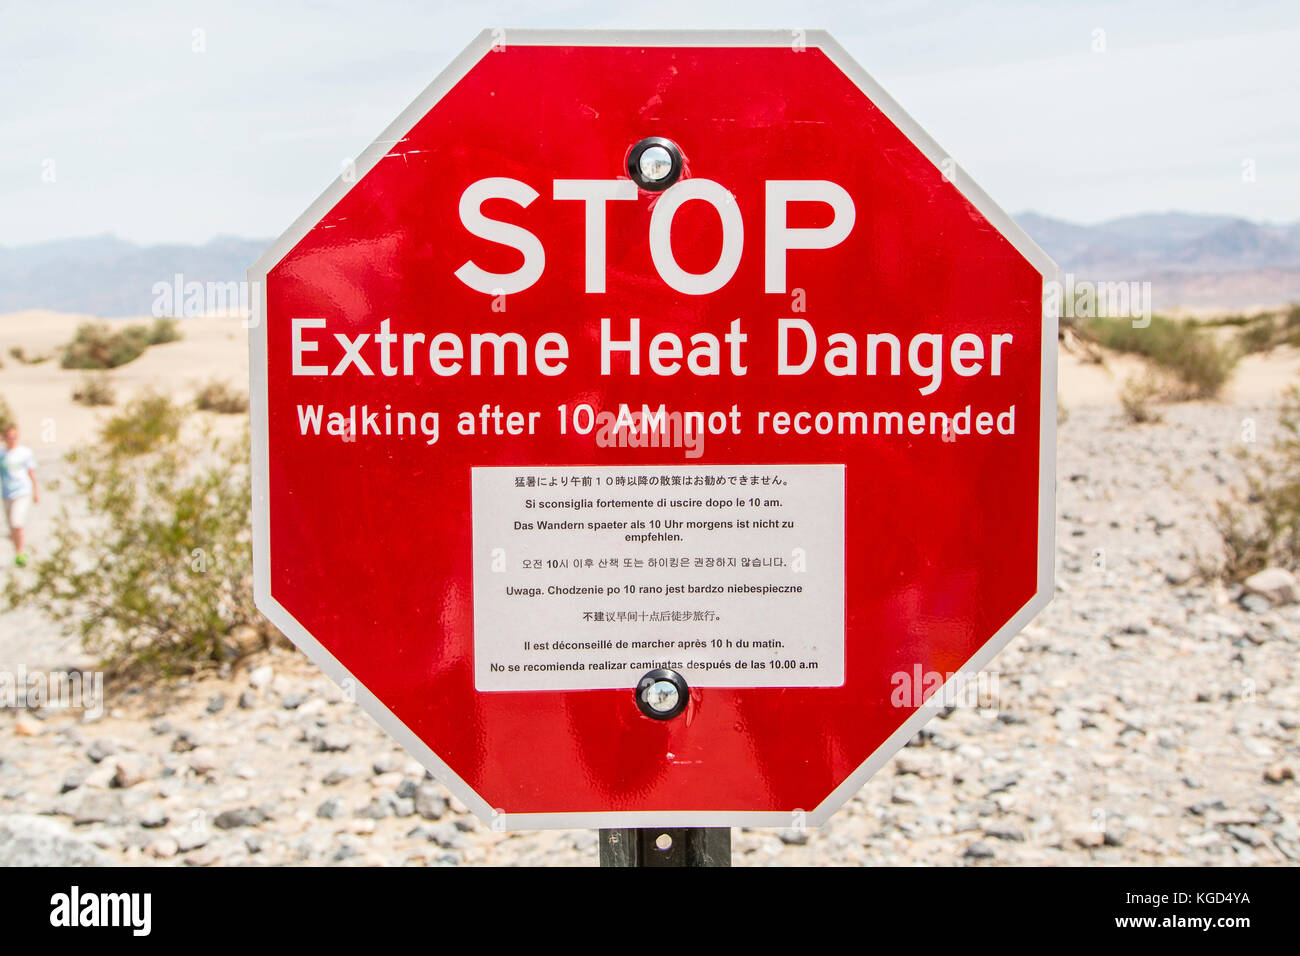 An extreme heat caution sign in the Arizona desert. Stock Photo